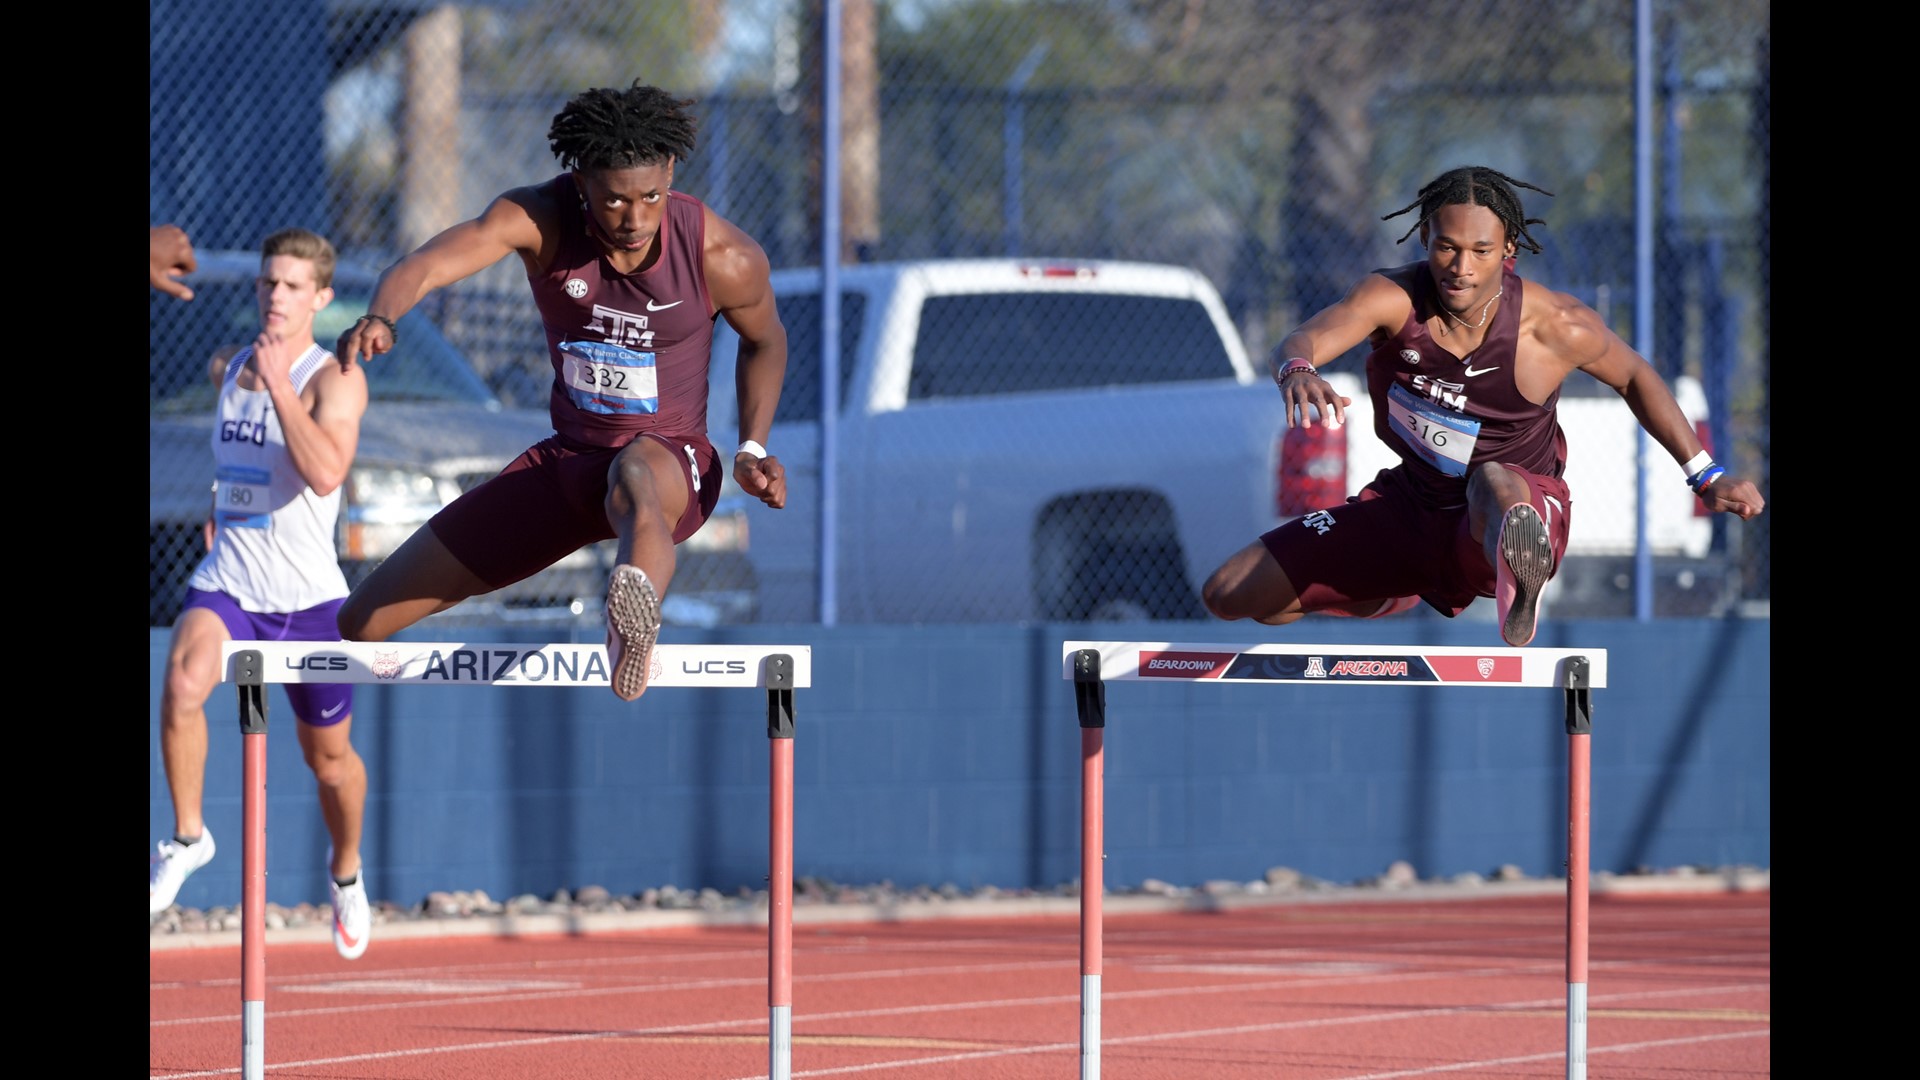 Aggies Claim 10 Event Titles to Wrap Up the Willie Williams Classic